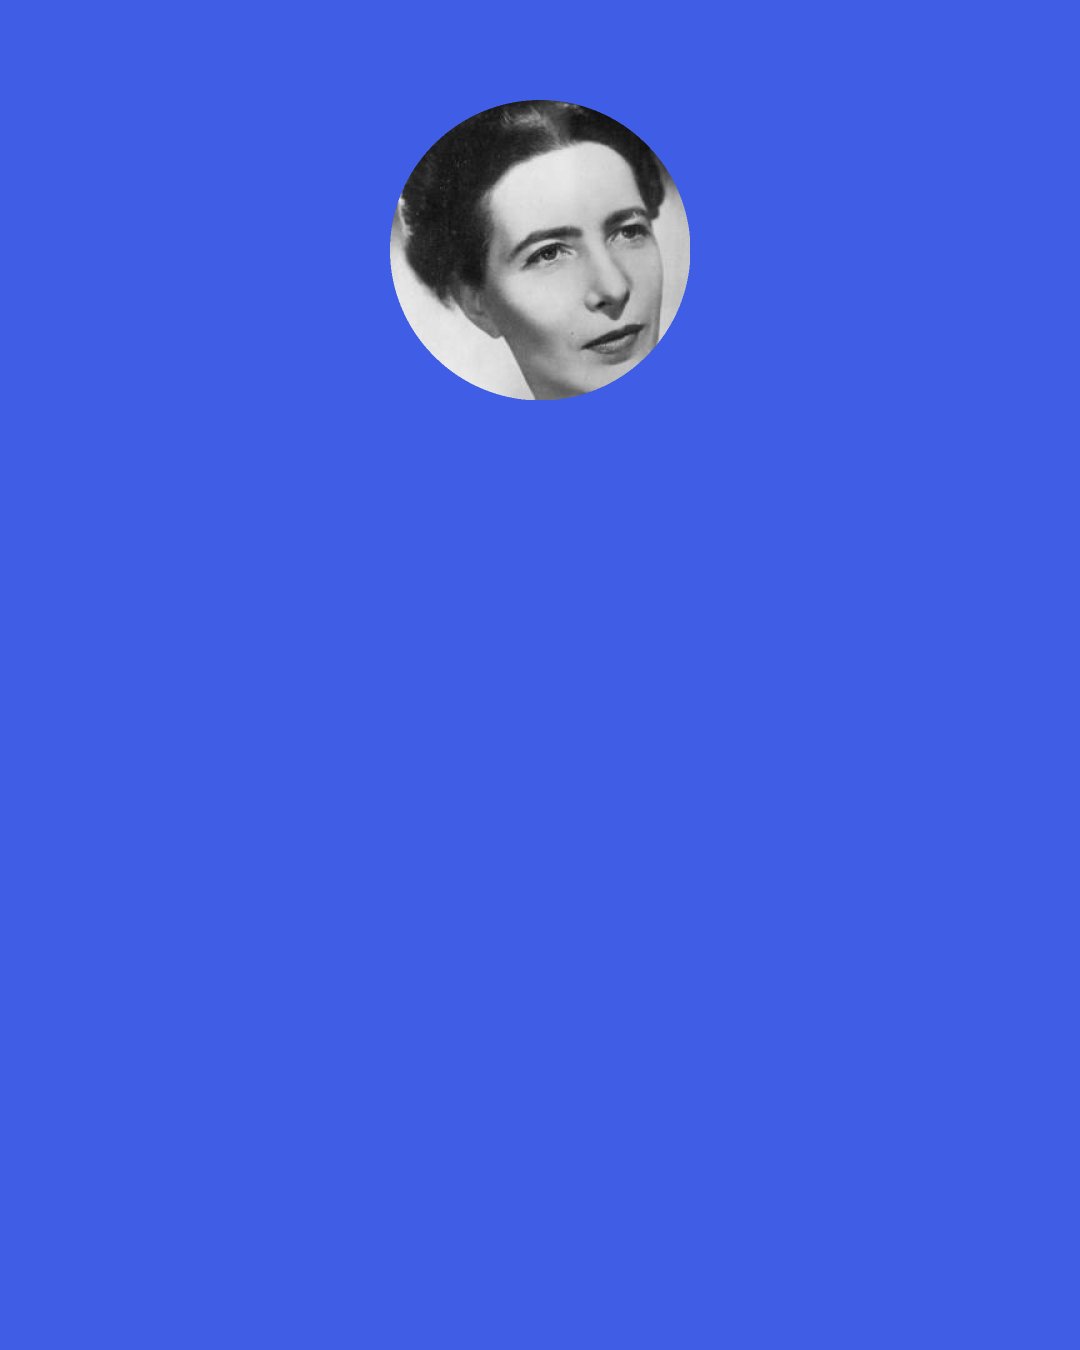 Simone de Beauvoir: I could see no reason for being sad. It´s just that it makes me unhappy not to feel happy.